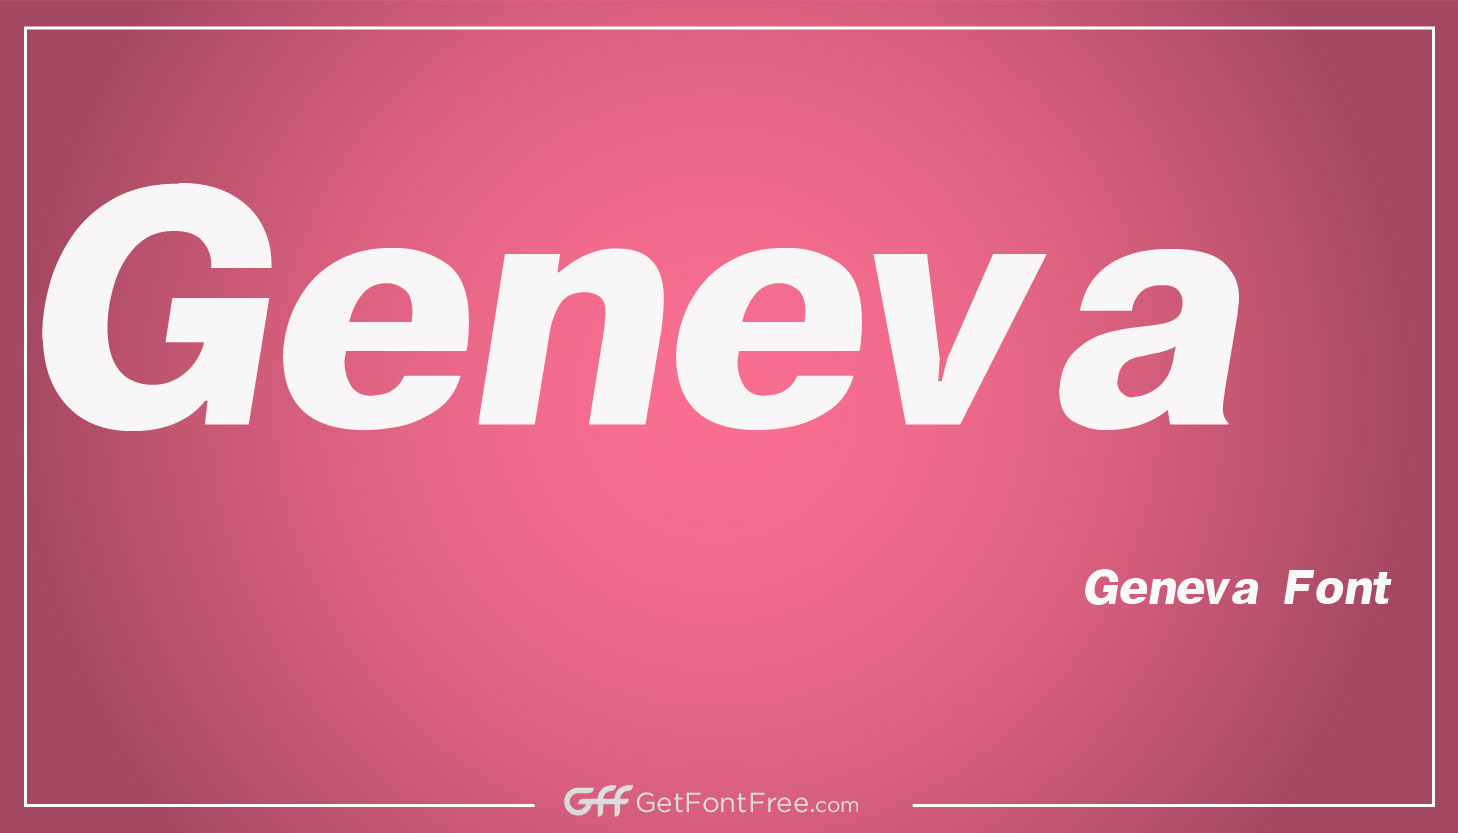 Geneva Font is a sans-serif font that was designed by Apple Computer in the 1980s. It was originally used as the system font for the Macintosh operating system and was widely popular in the early days of the Macintosh. Geneva is known for its clean, simple design, which makes it easy to read and well-suited for use in a variety of applications. It is a popular choice for use in website design, graphic design, and other visual media.